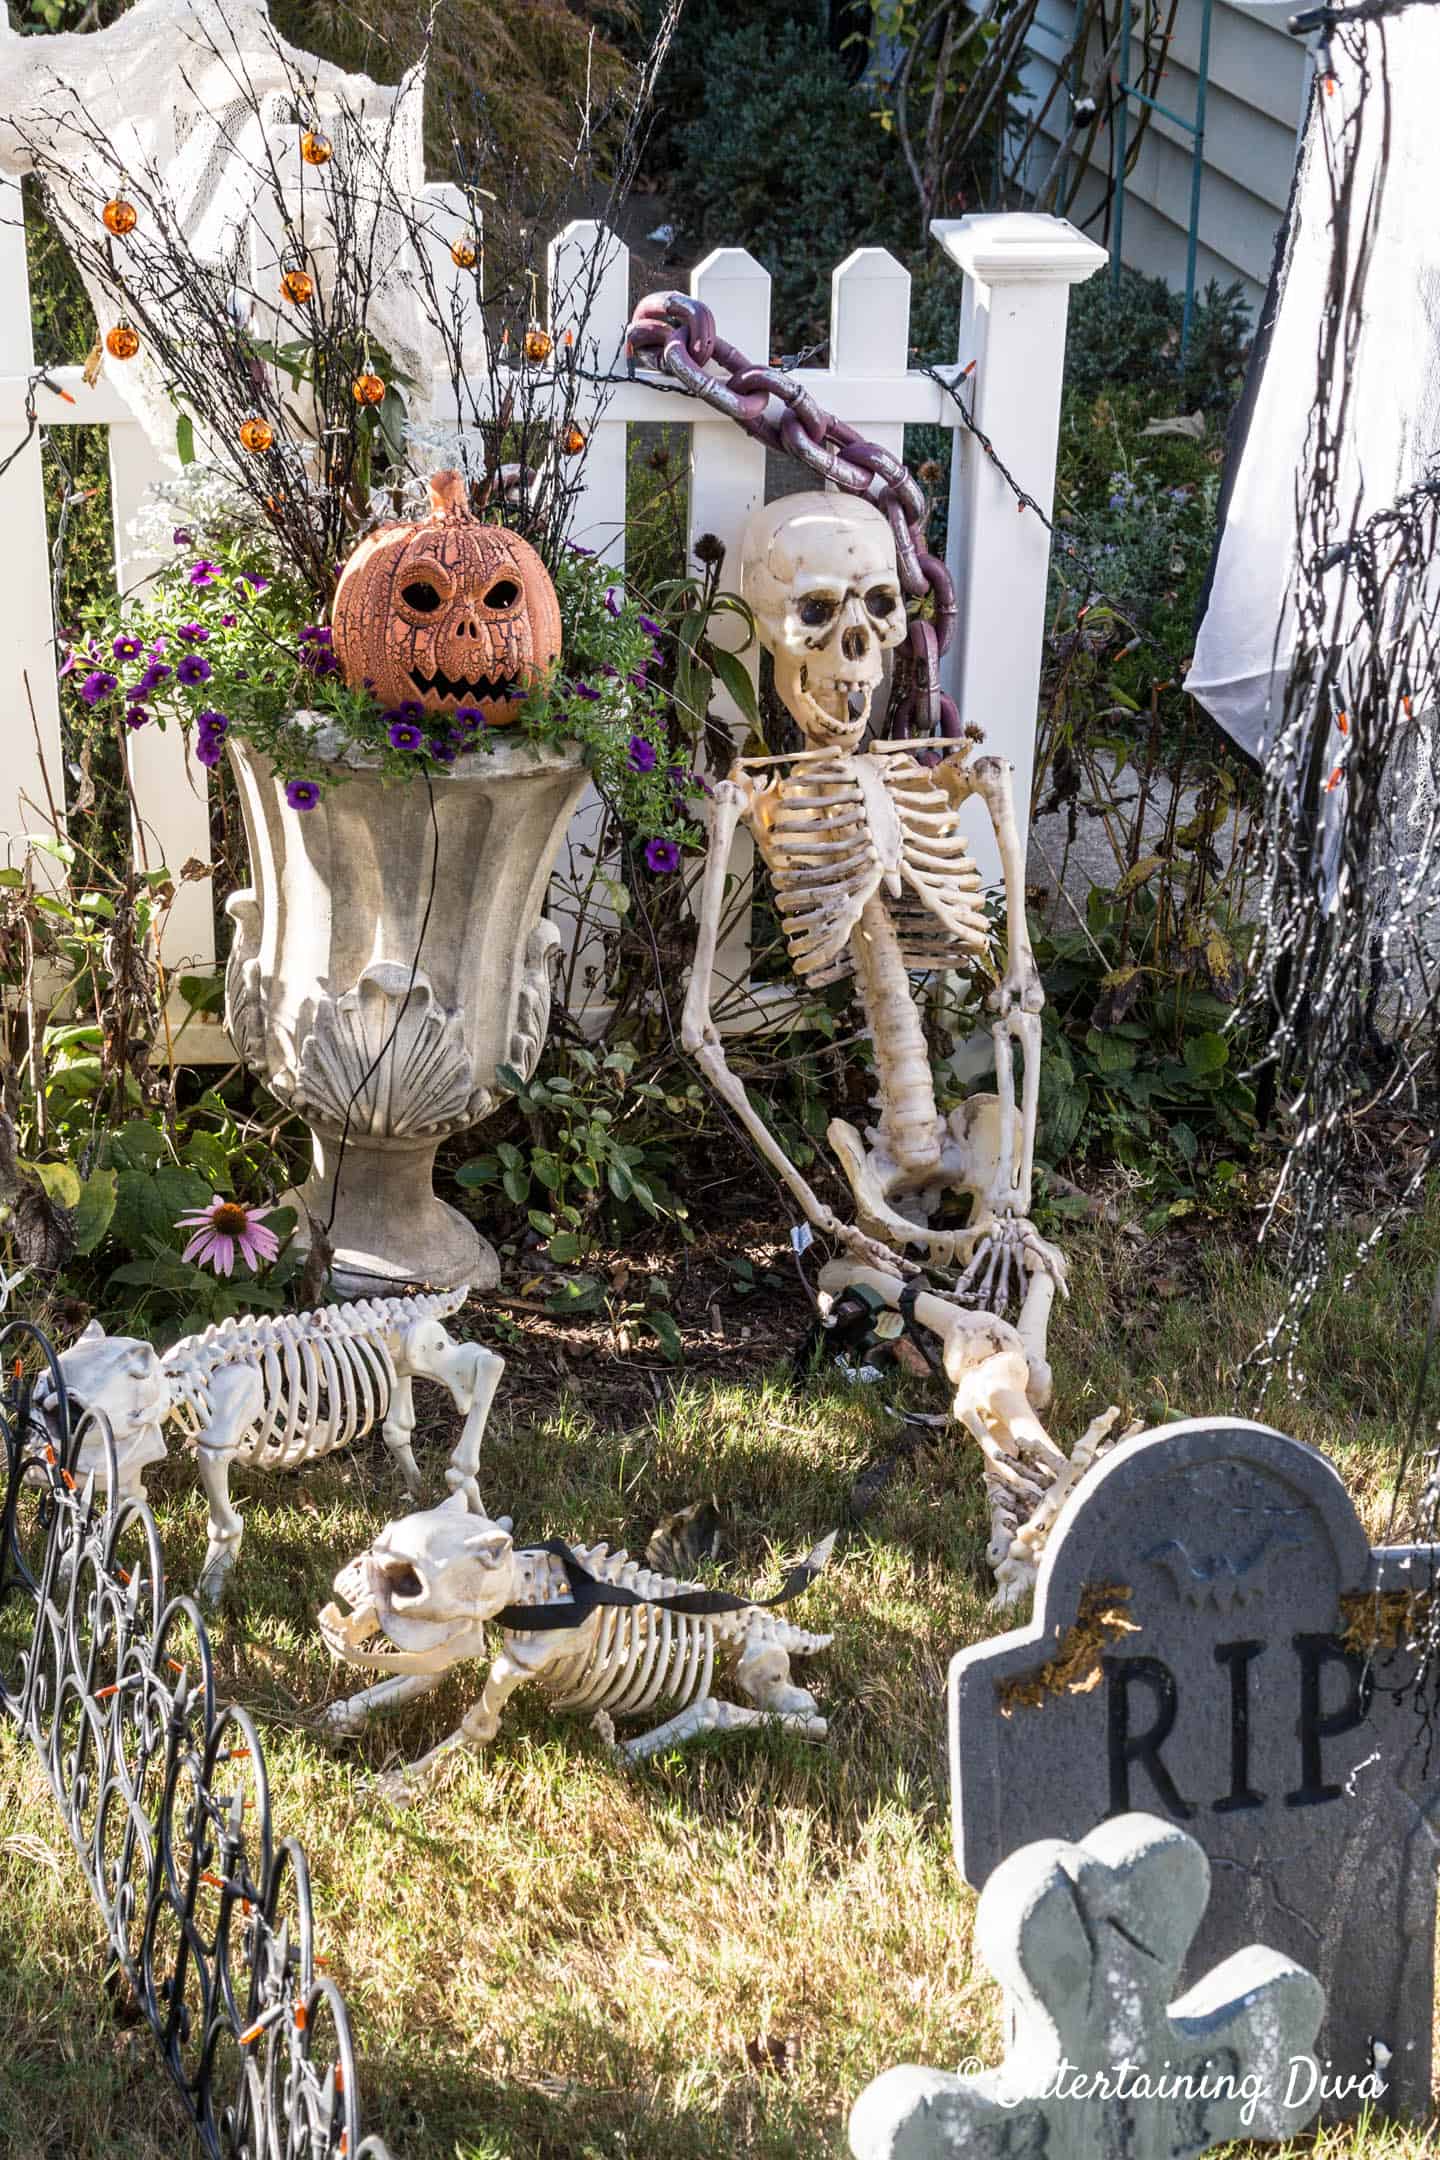 Halloween graveyard with a skeleton, dog skeletons and chains on the fence behind